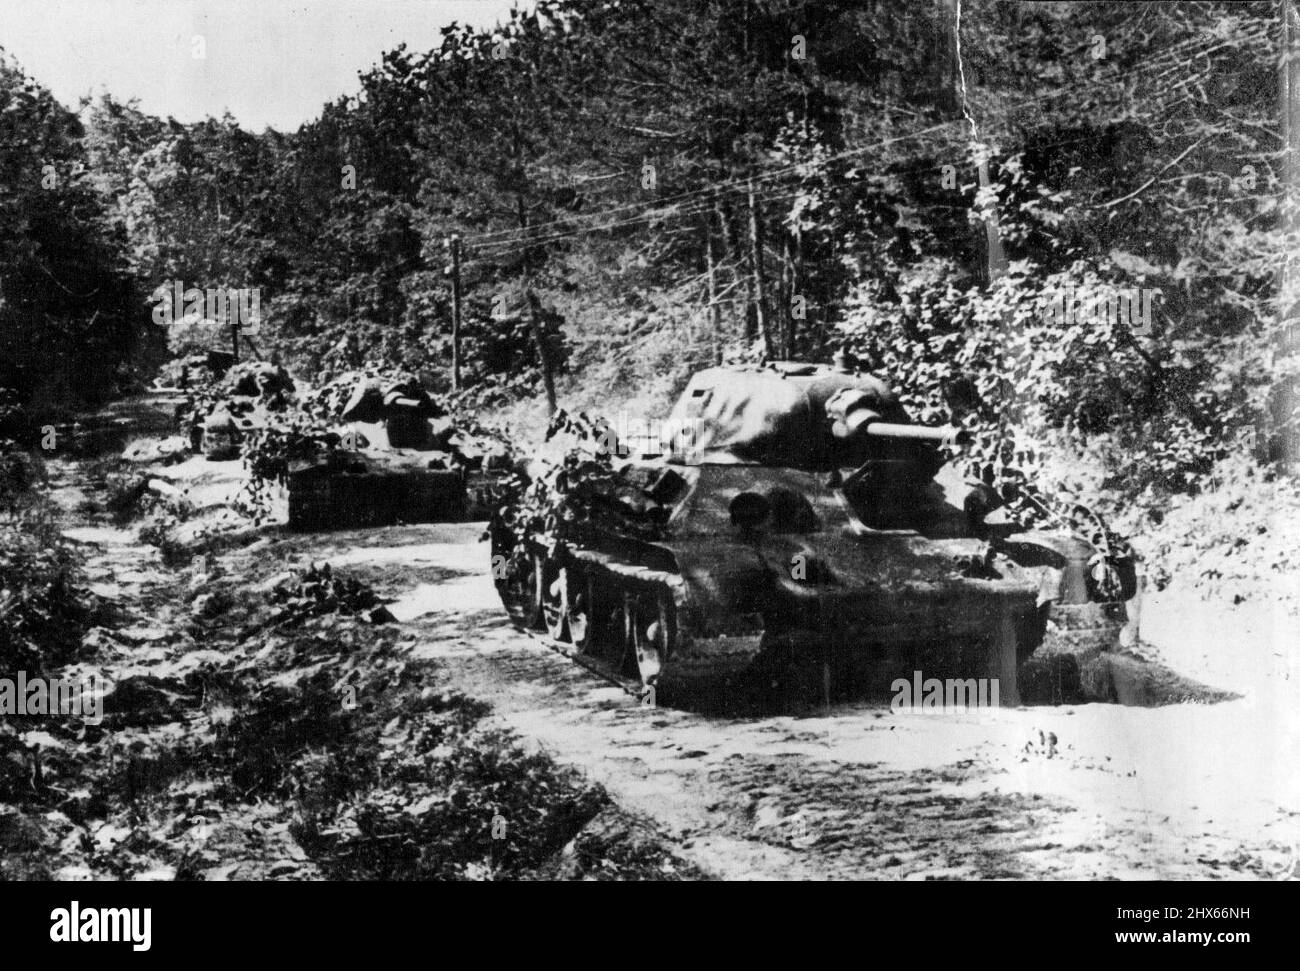 Tanks Of The Red Army Of The U.S.S.R. -- Red Army tanks moving up. The myth of invisibility with which the Germans surrounded their Panzer Divisions has been exploded on the battle-fields of Russia. Russian tanks have been more than holding their own, and very heavy casualties among the crack tank forces of Germany are reported from the recent fighting. September 9, 1941. Stock Photo